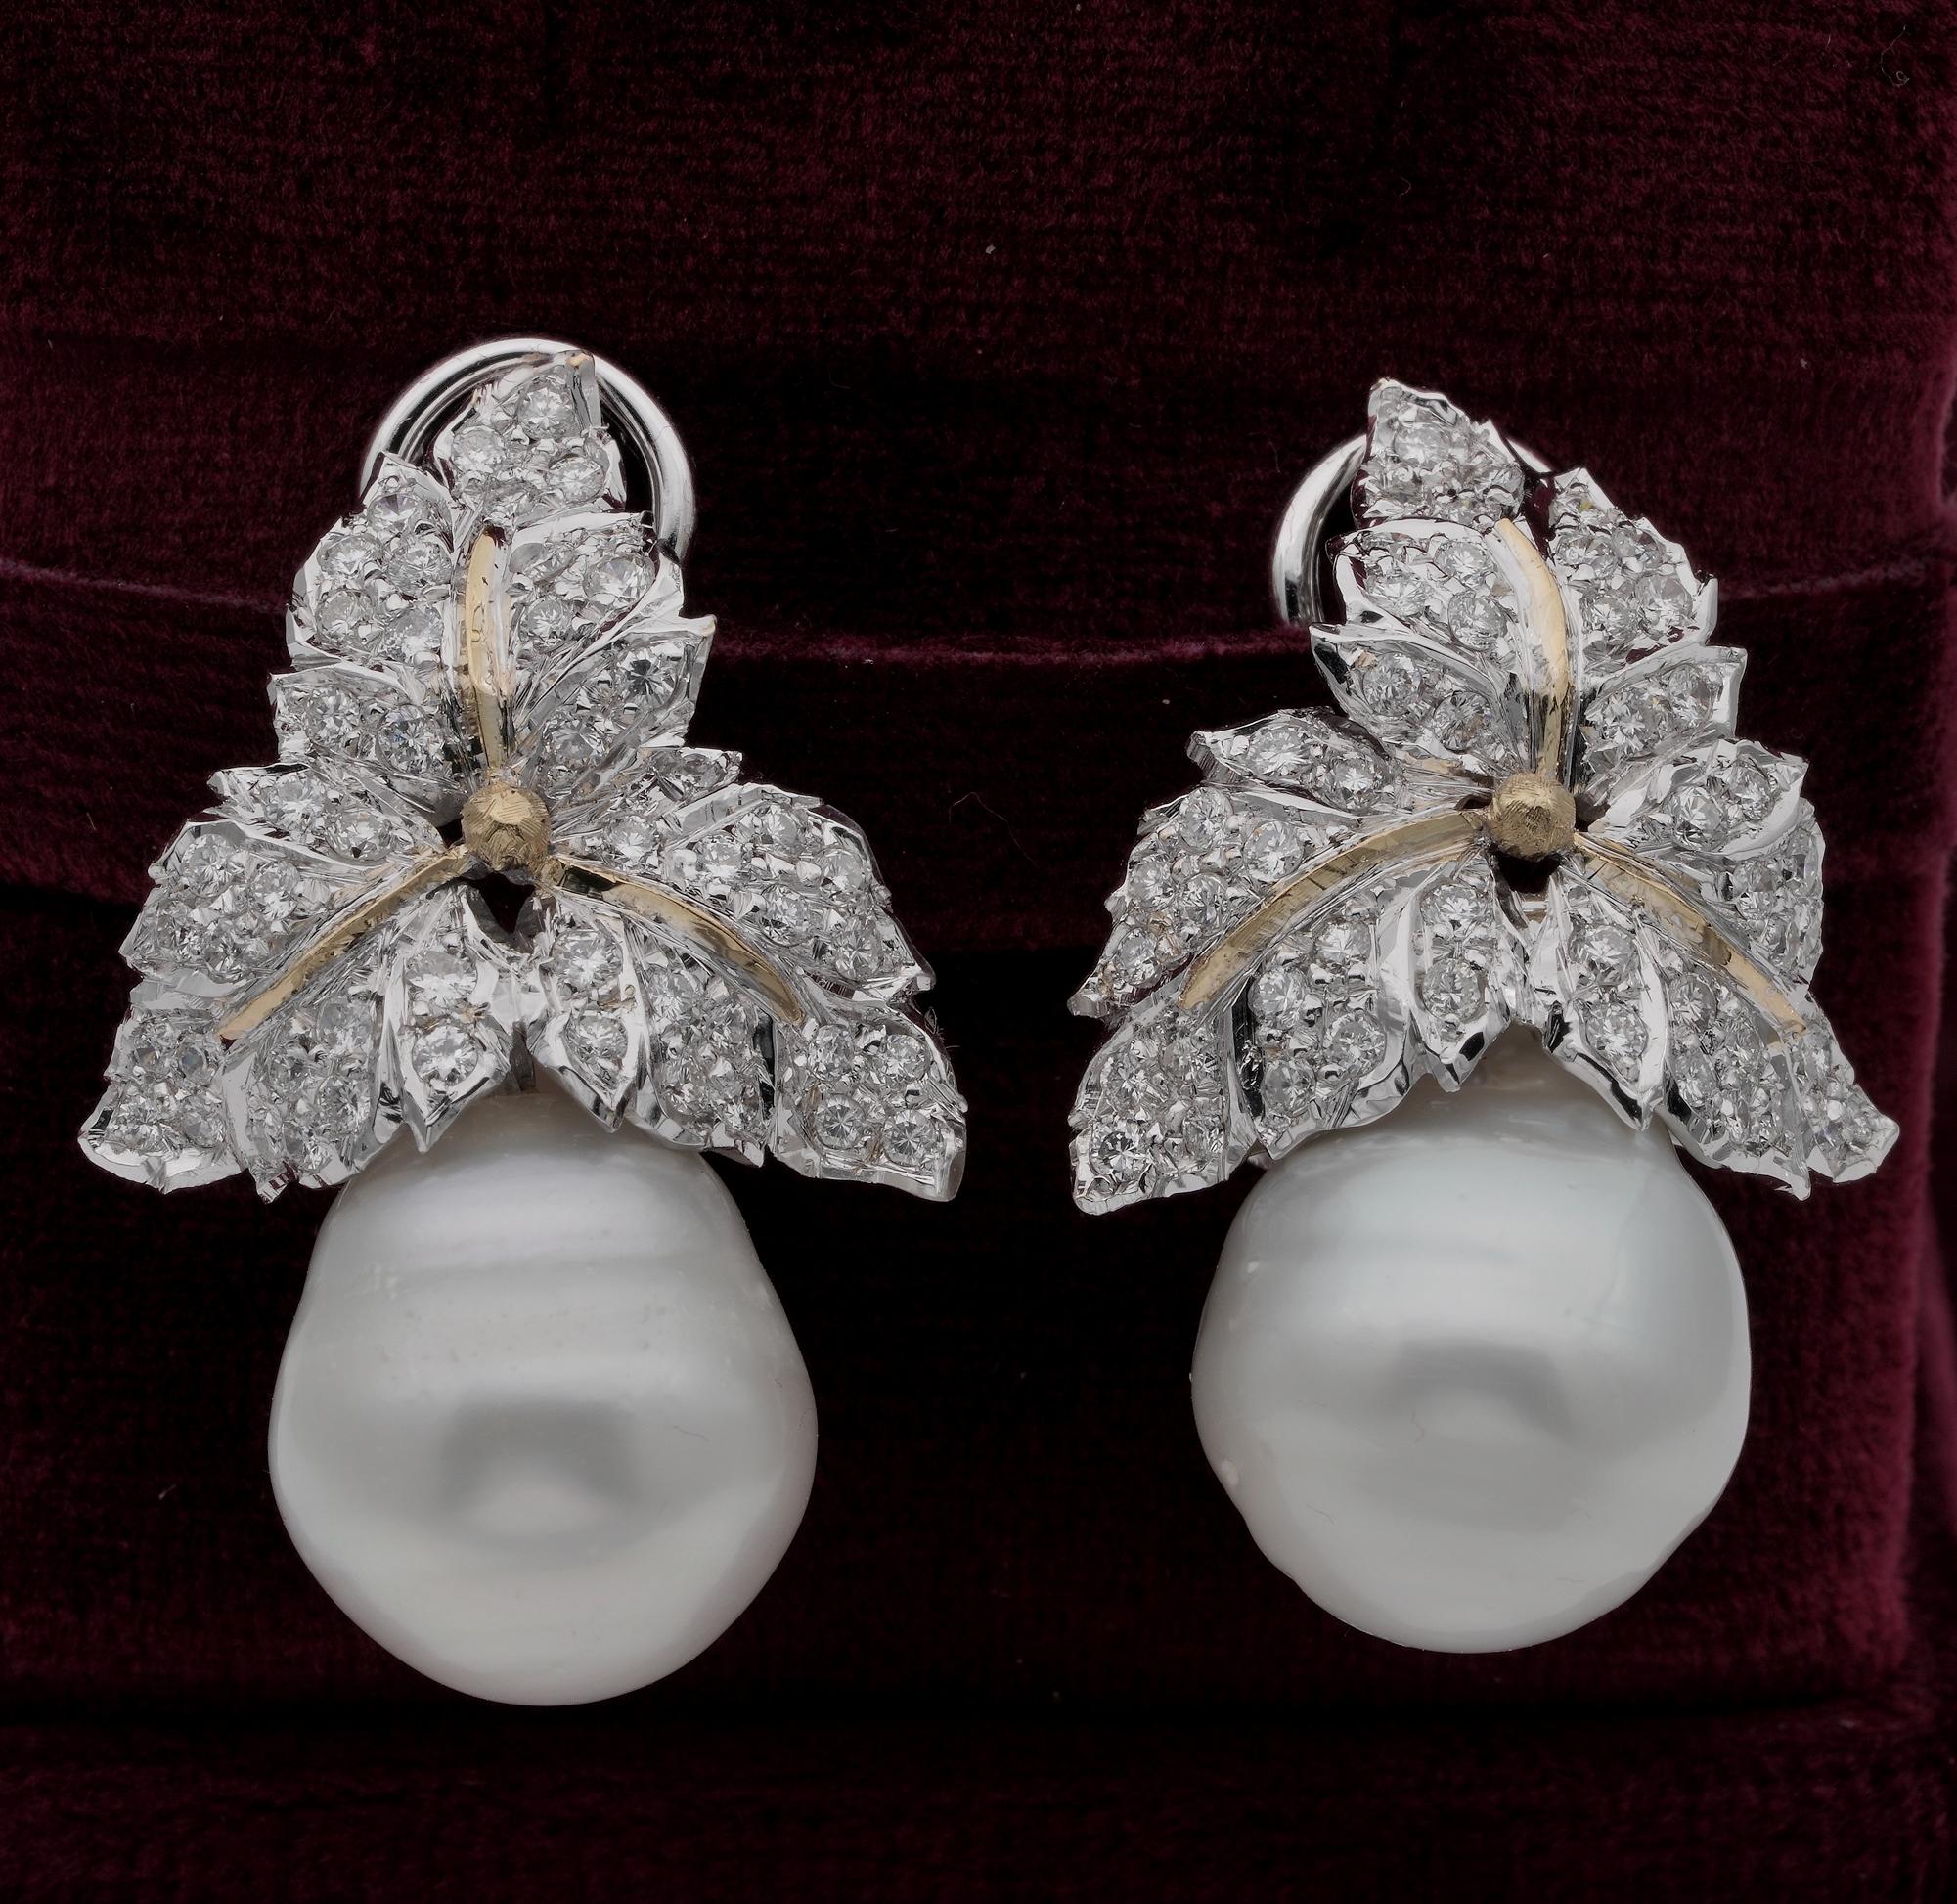 These outstanding vintage pair of earrings date 1960 ca
Superbly hand modelled as unique by some past master in a group of fantastic leaves toppingtwo large South Sea Pearls,  solid 18 KT white gold
The two large South Sea Pearls are 14 mm. x 13.5